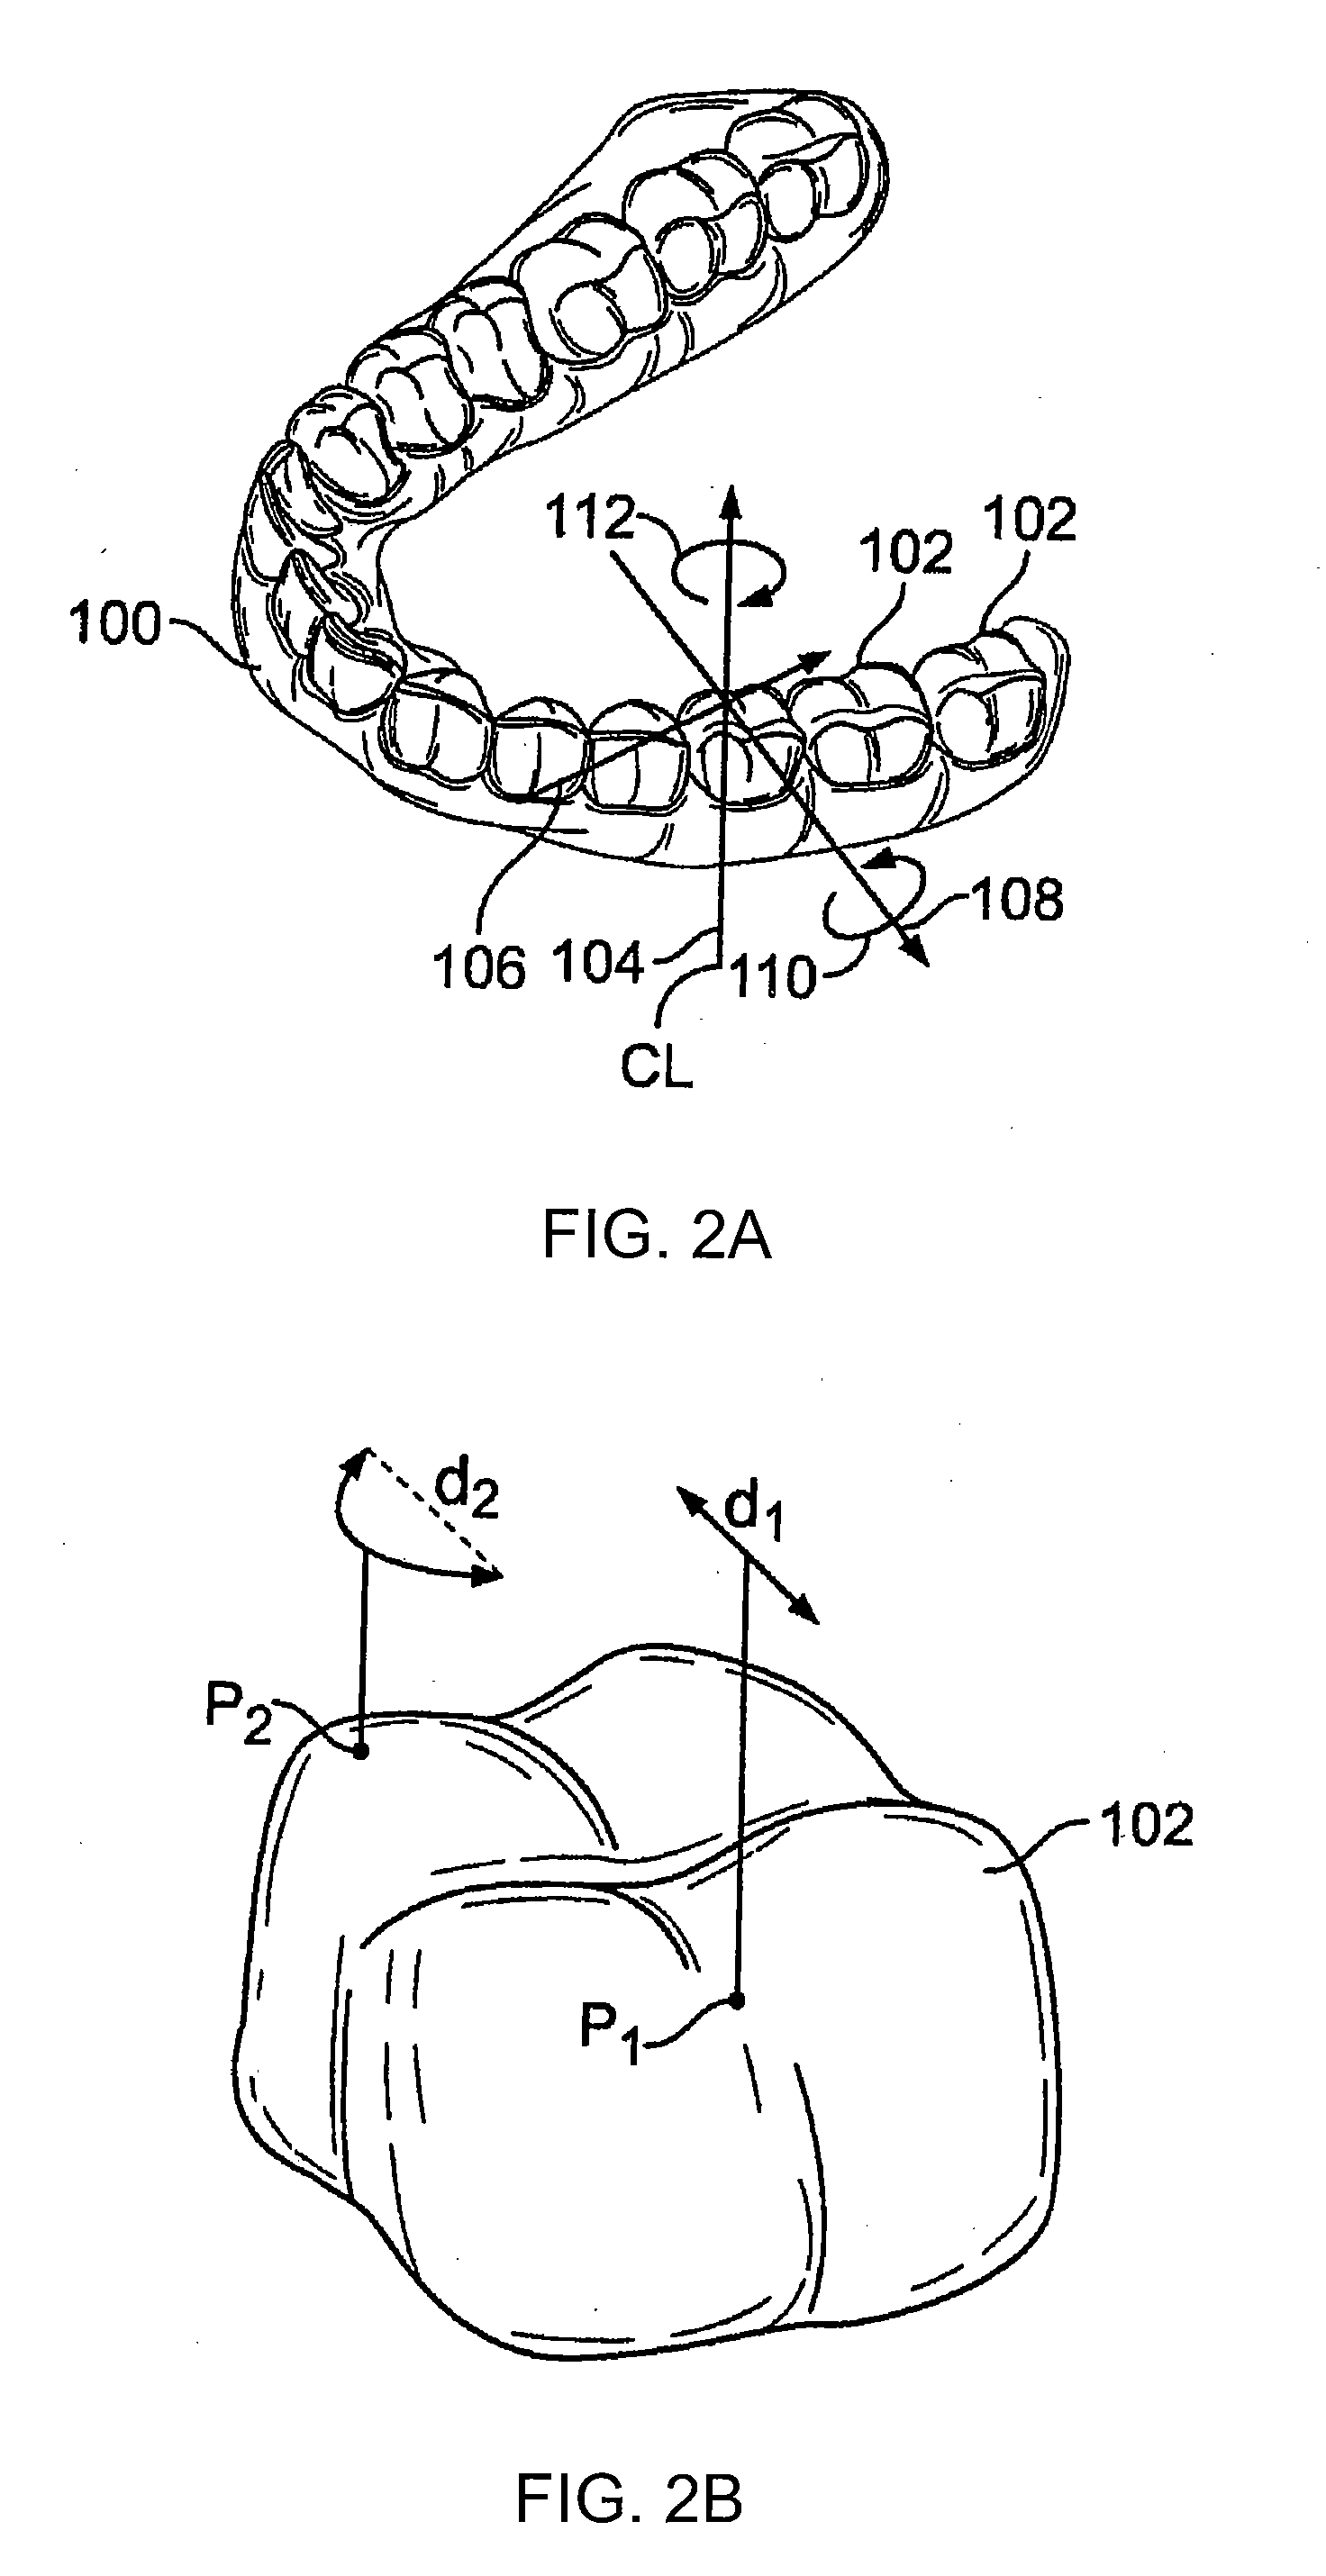 Treatment planning and progress tracking systems and methods